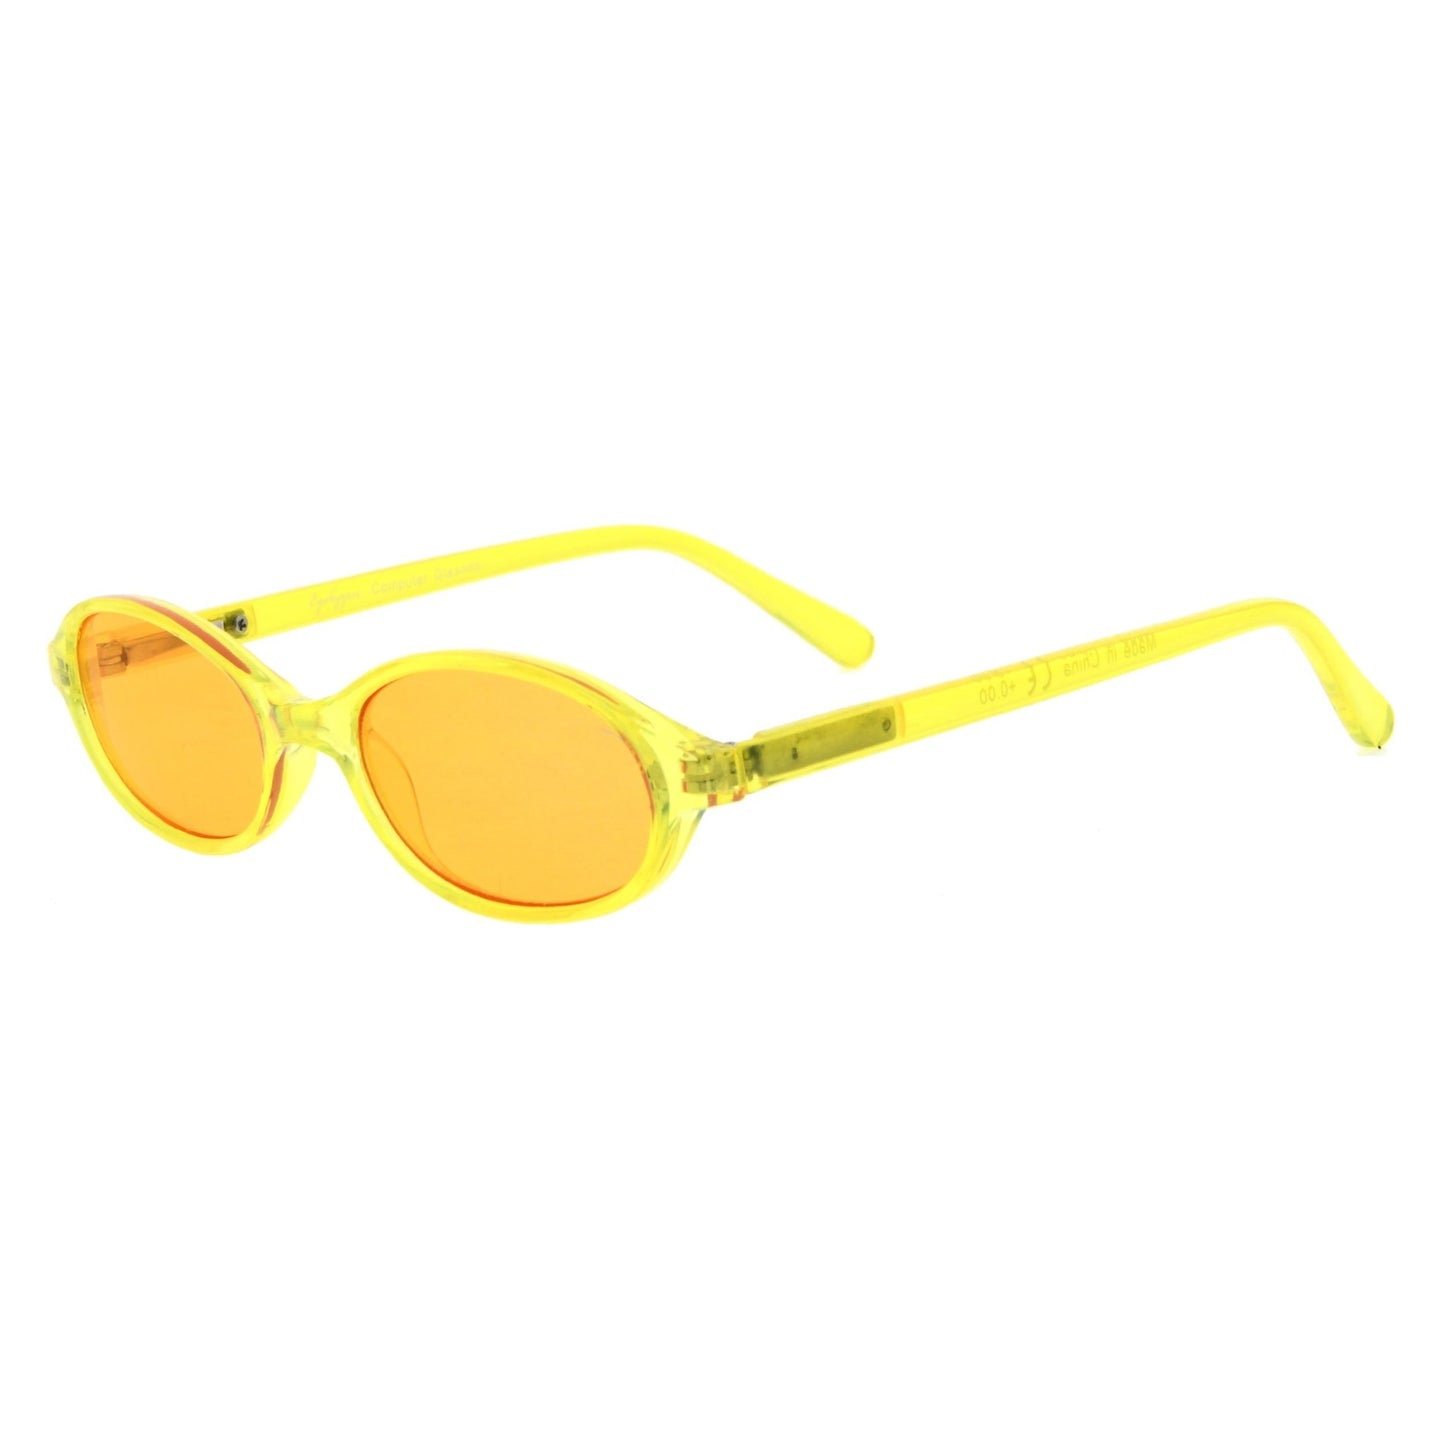 Stylish Oval Computer Eyeglasses for Kids Yellow DSK01